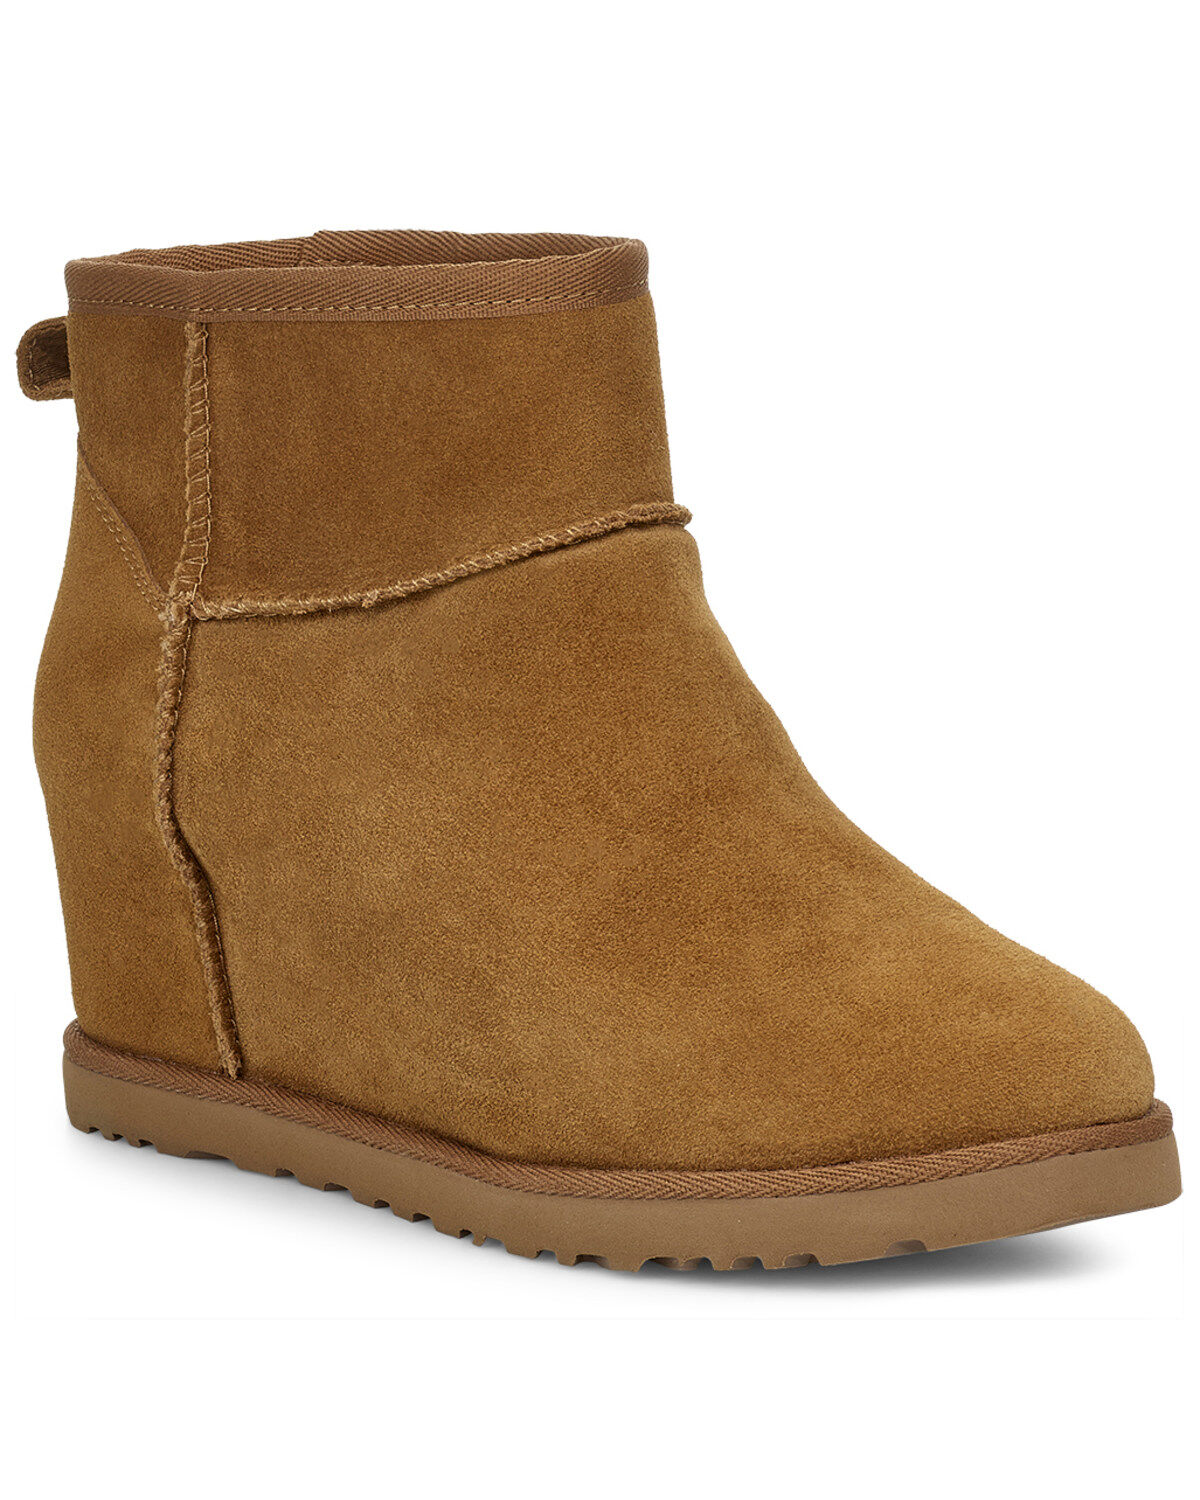 women's classic uggs boots on sale